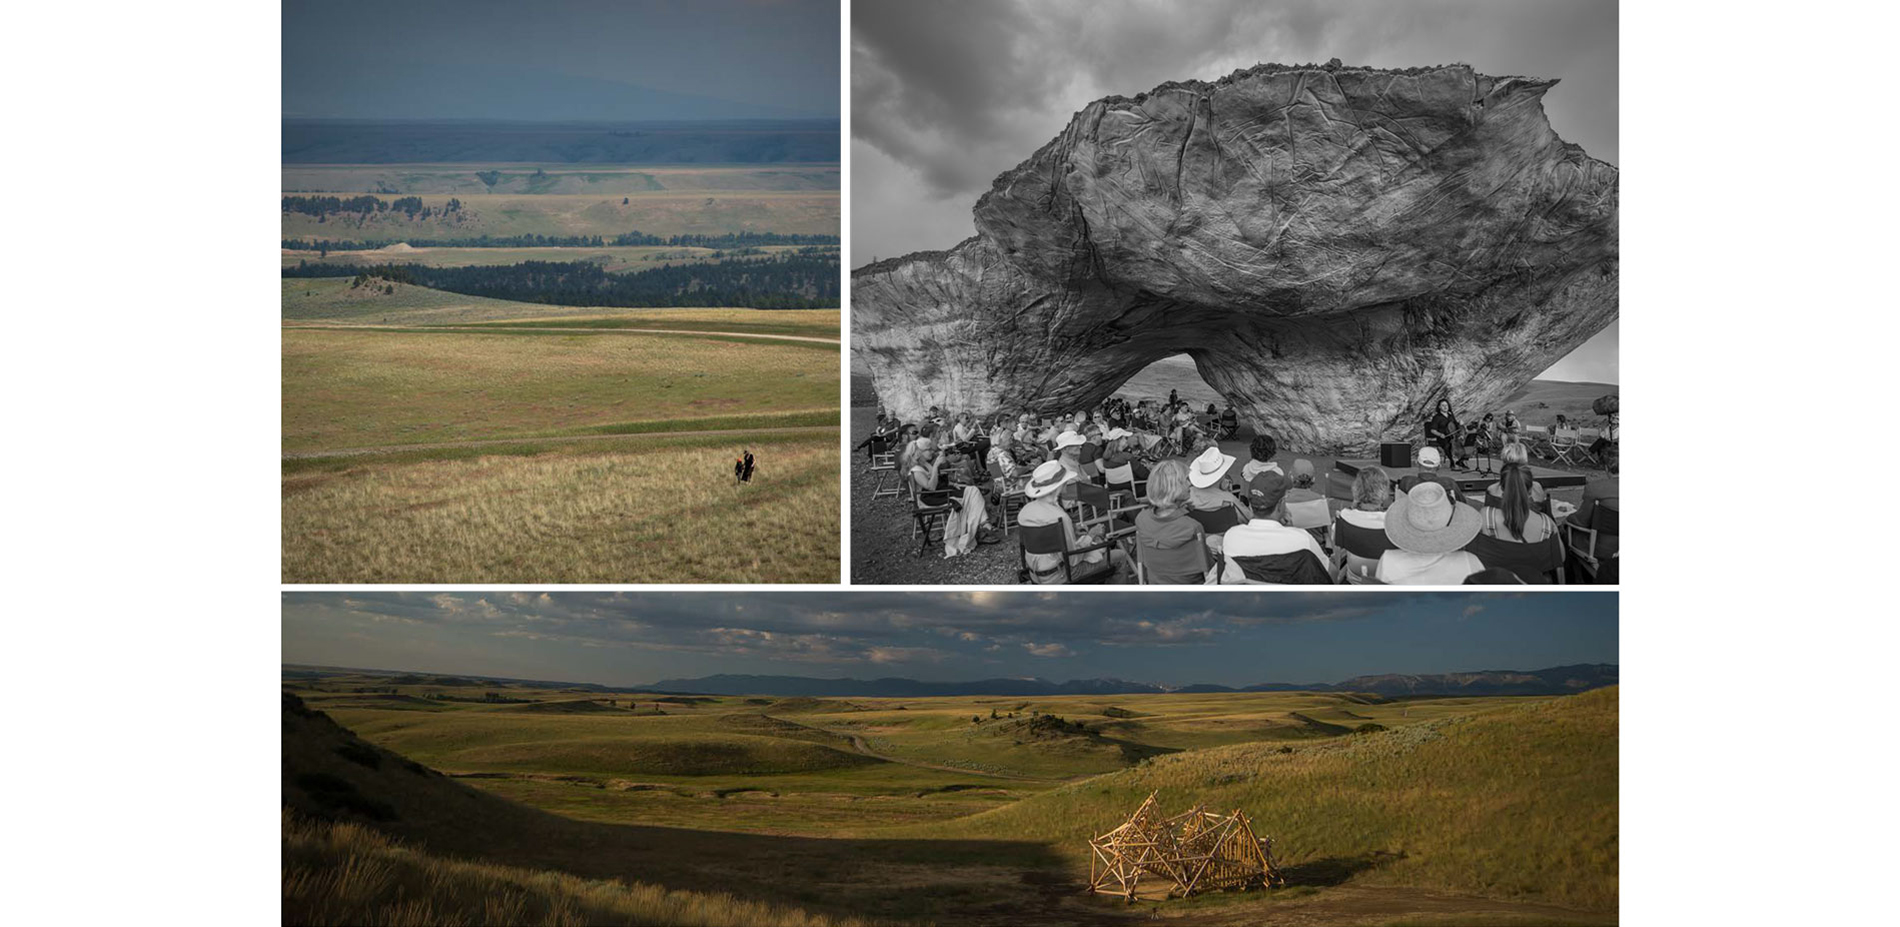 Tippet Rise was envisioned as a place where music, art, and nature are experienced simultaneously and without spectacle. The colossal scale is only su…